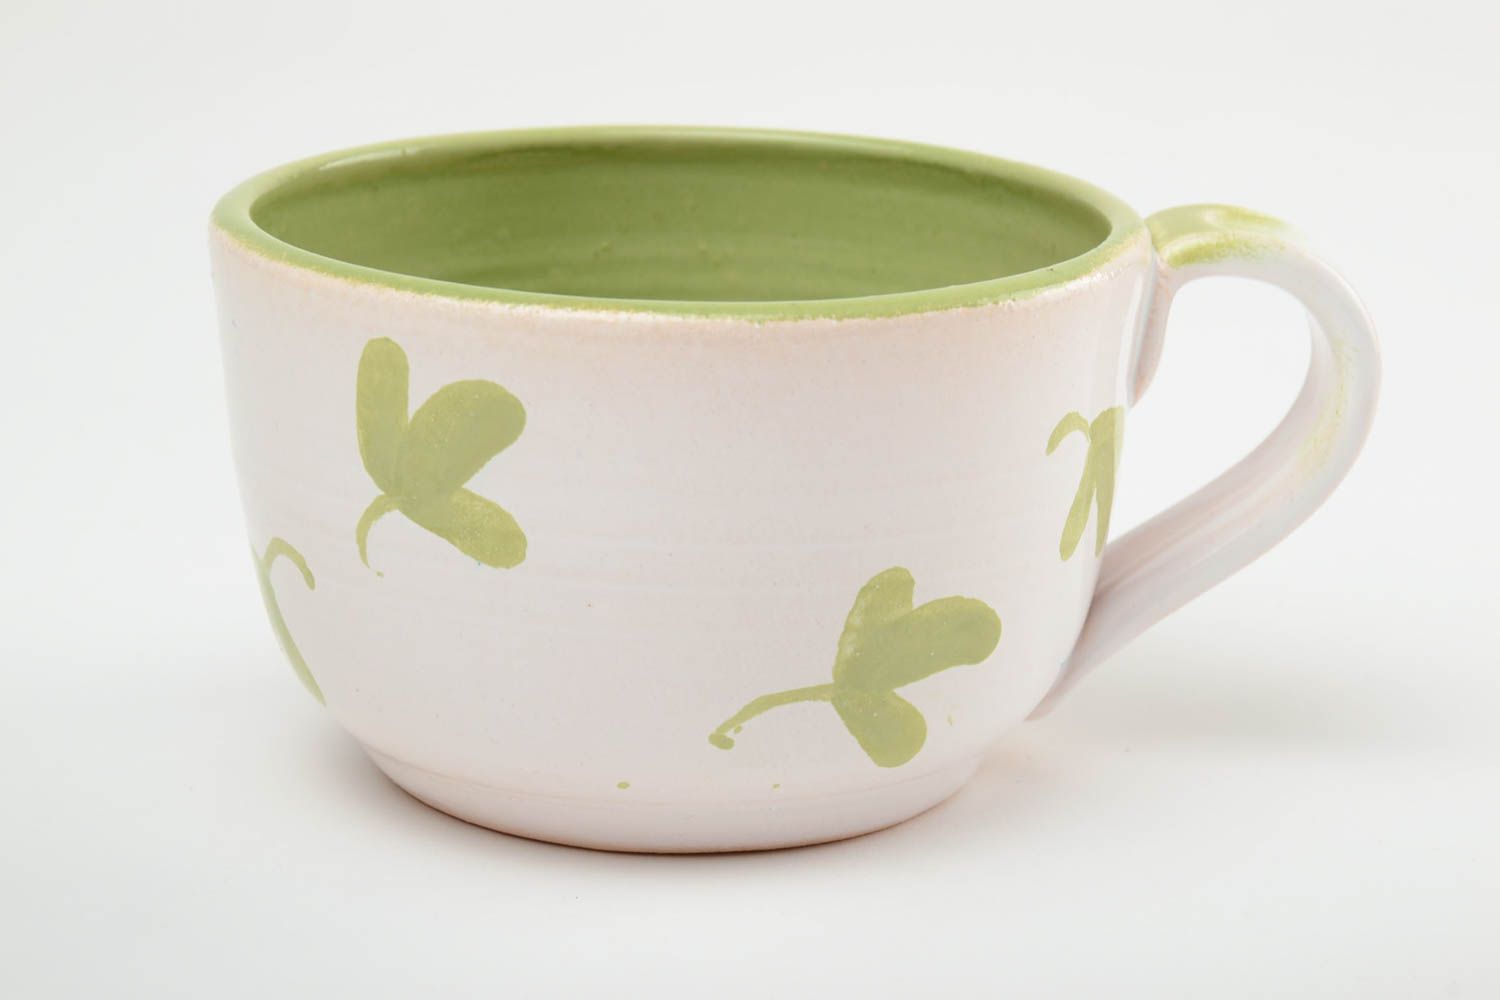 11 oz lime glazed ceramic teacup with handle and heart pattern photo 3